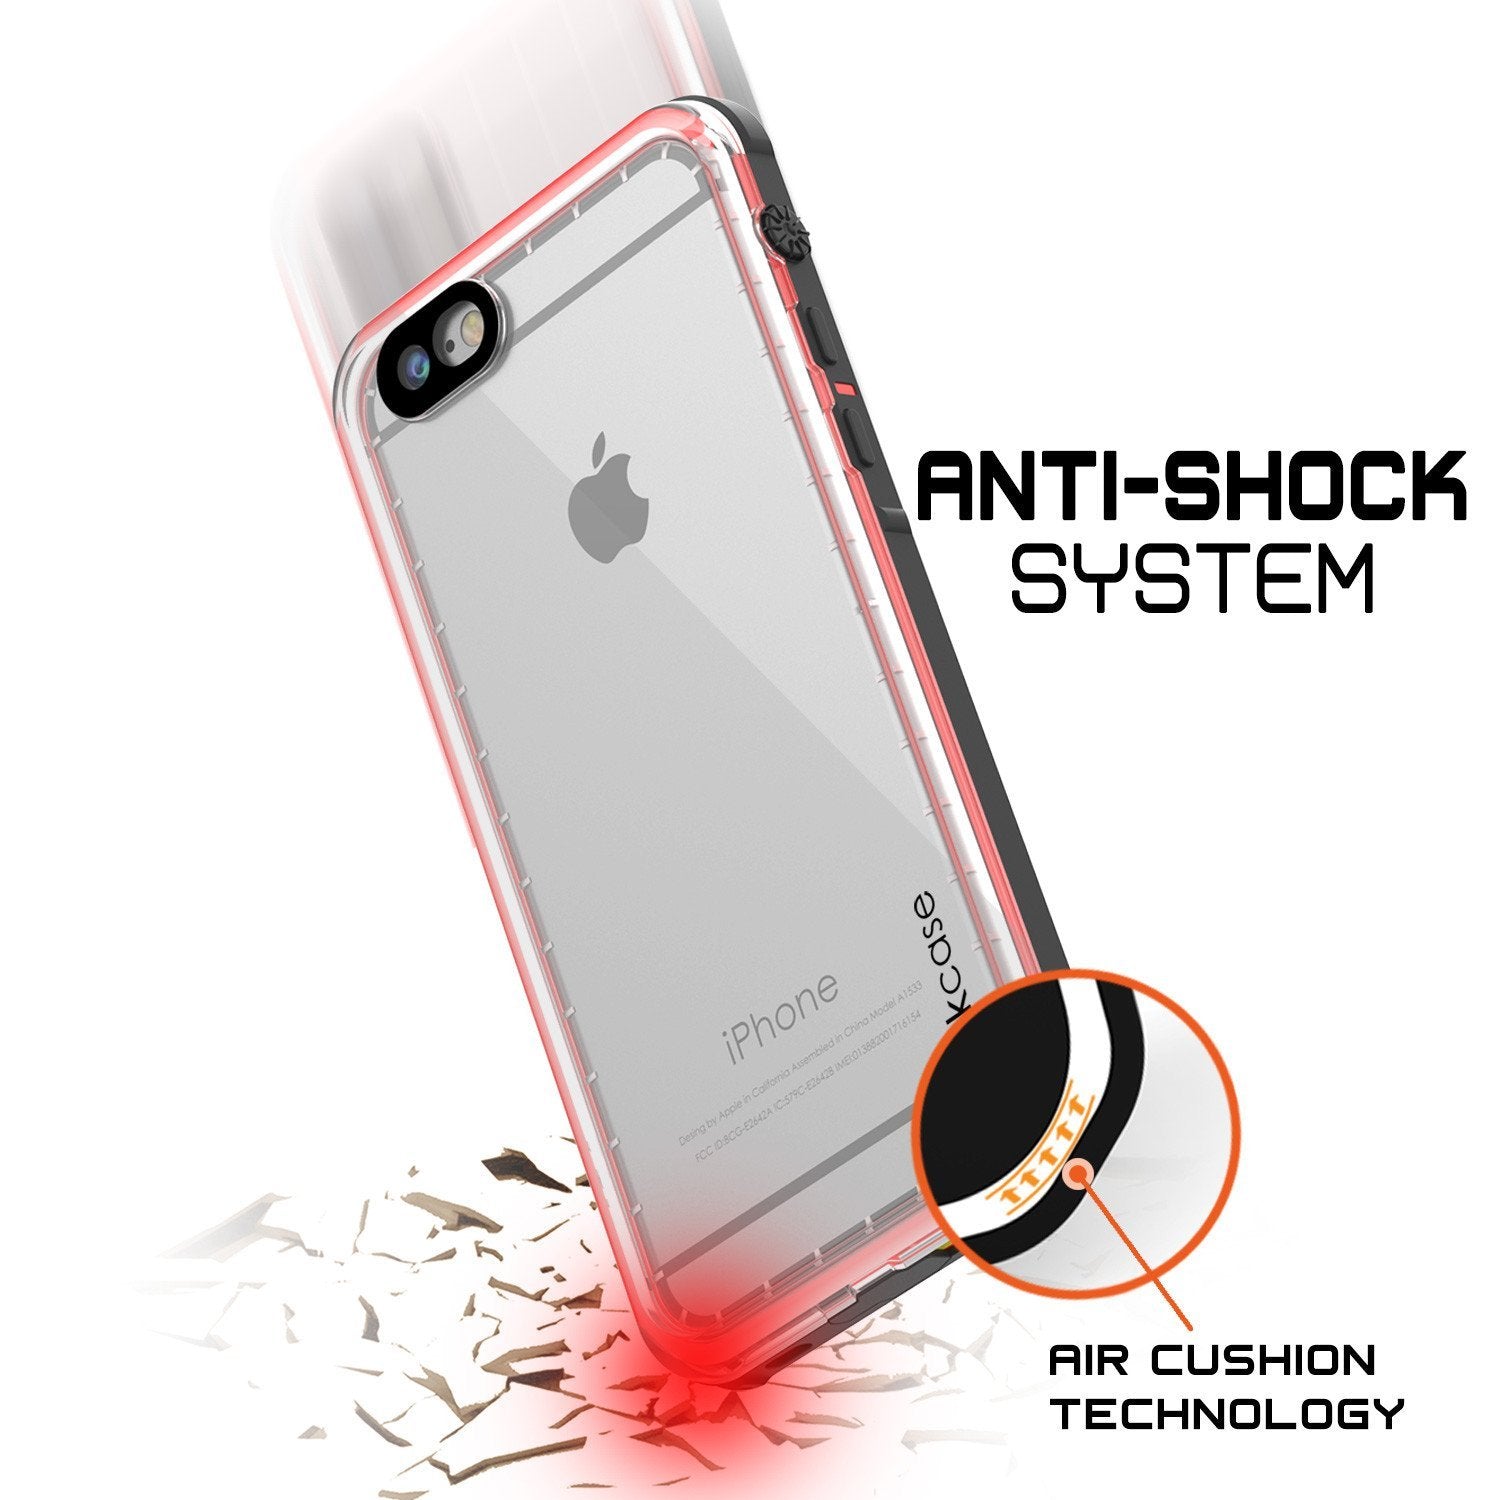 Apple iPhone 8 Waterproof Case, PUNKcase CRYSTAL Red W/ Attached Screen Protector  | Warranty - PunkCase NZ